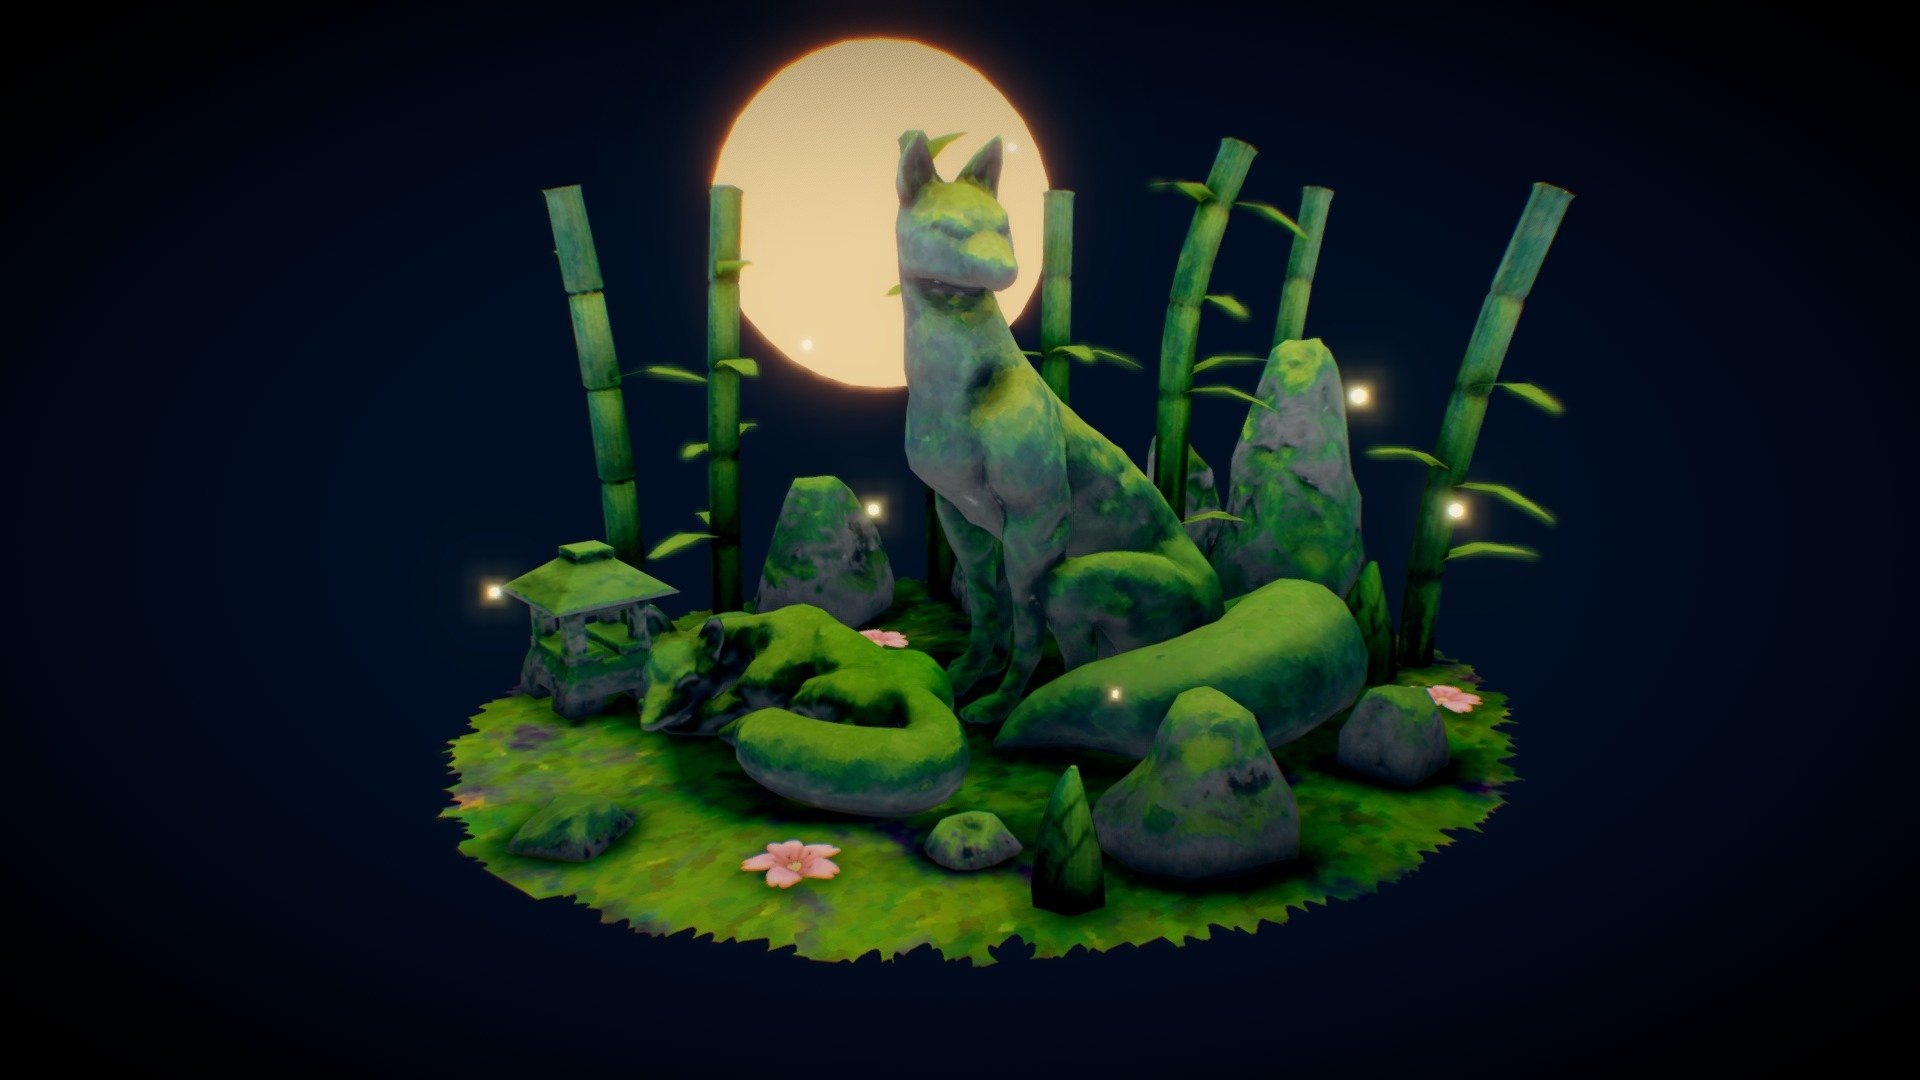 I make this work to practice stylized style. Hope you will like it!
Modeling in Blender
Texturing in Substance Painter - Fox Statues - 3D model by Yosapat Panutyotin (@Matcha.Tea) 3d model